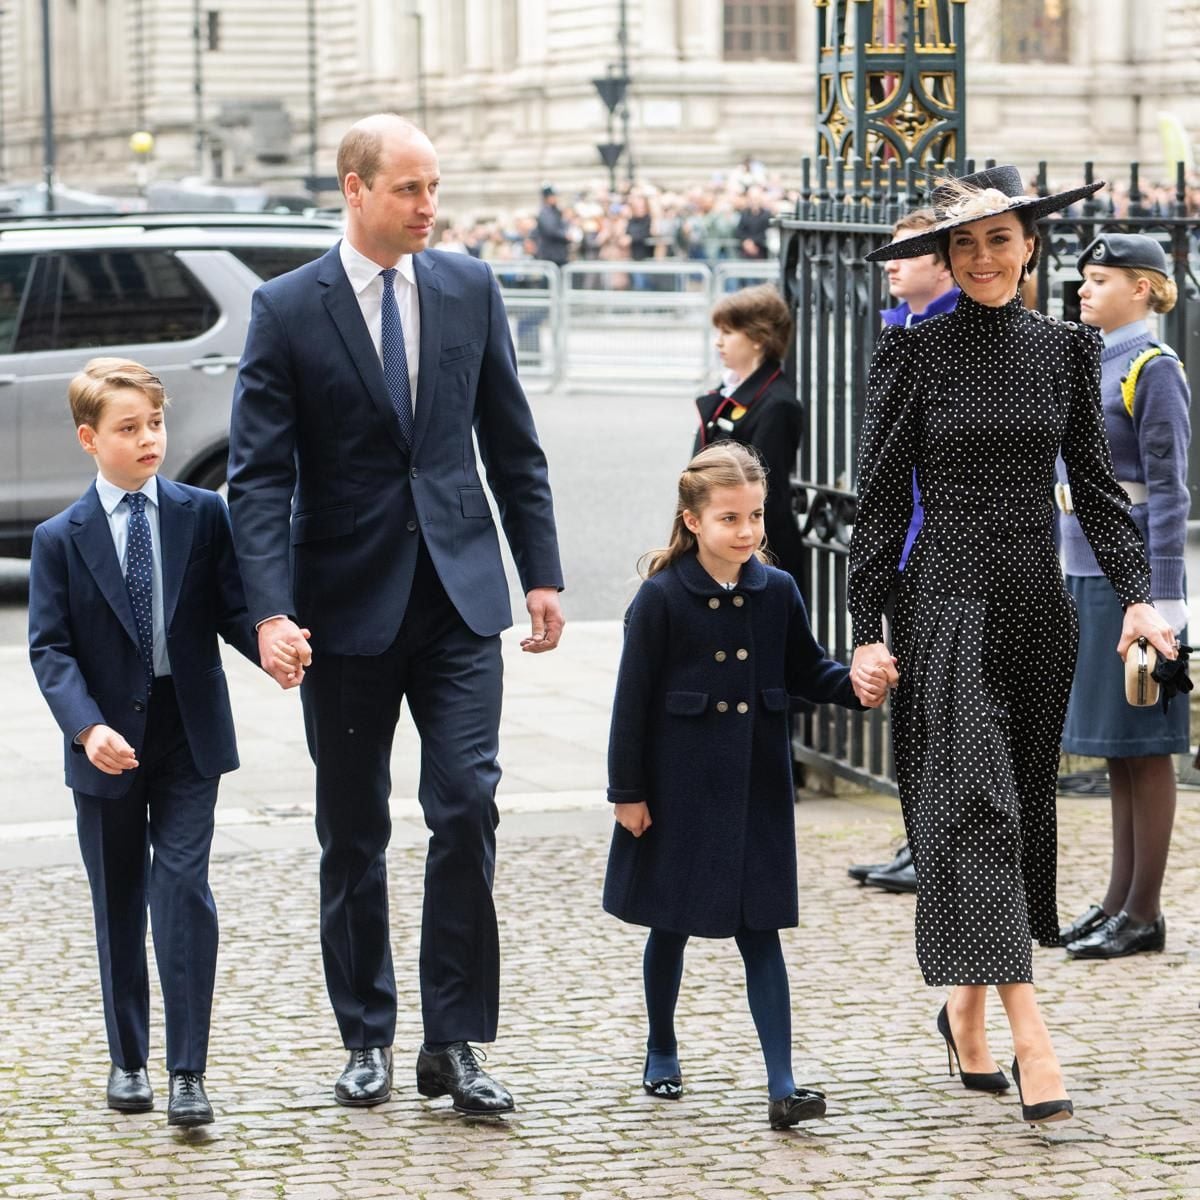 The Duke and Duchess of Cambridge along with their eldest children, Prince George and Princess Charlotte.